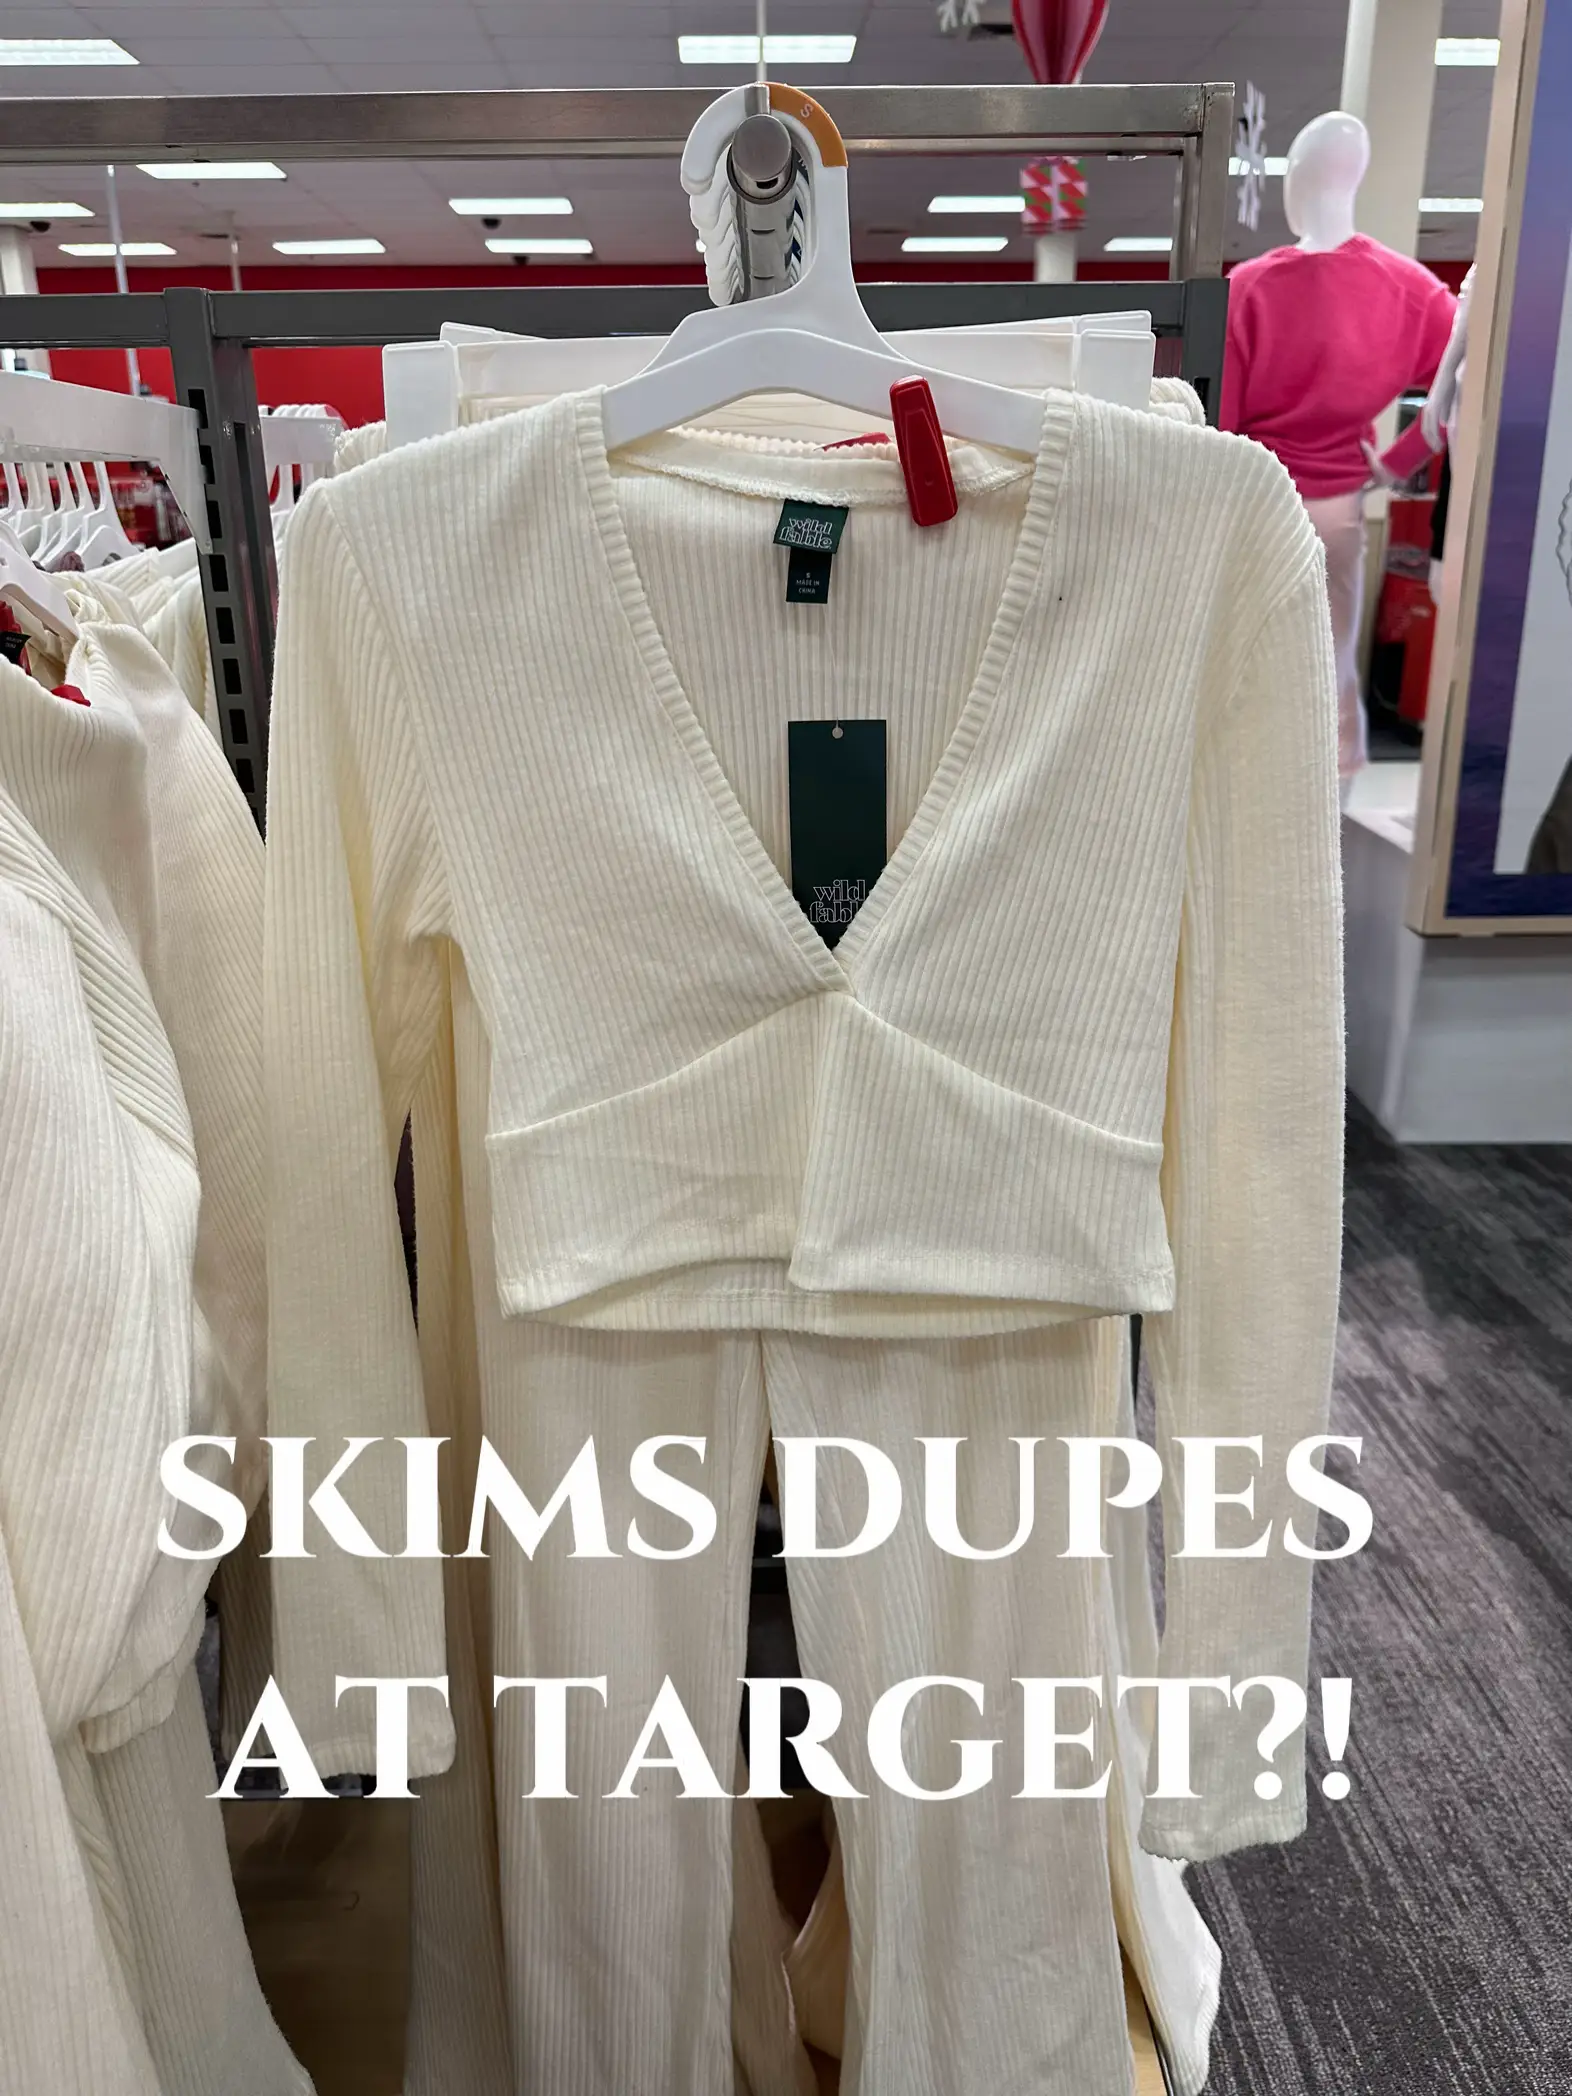 Skims Dupes at Target?? The best Skims Dupes yet?! 